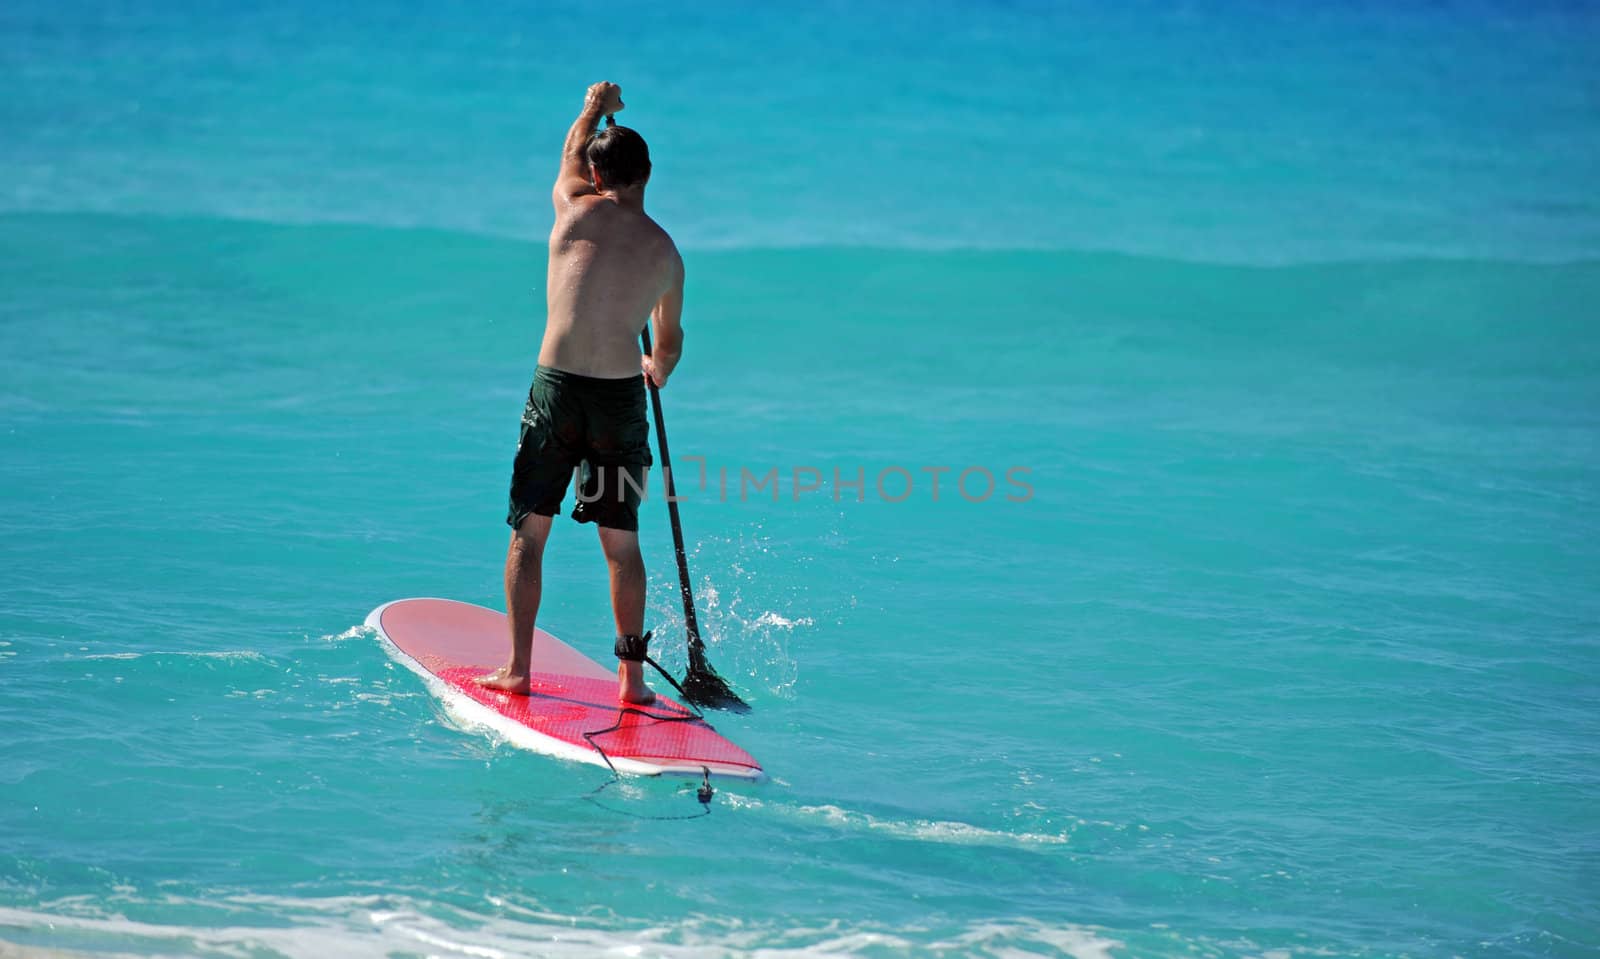 Man on Paddle Board paddling out to the ocean in tropical waters